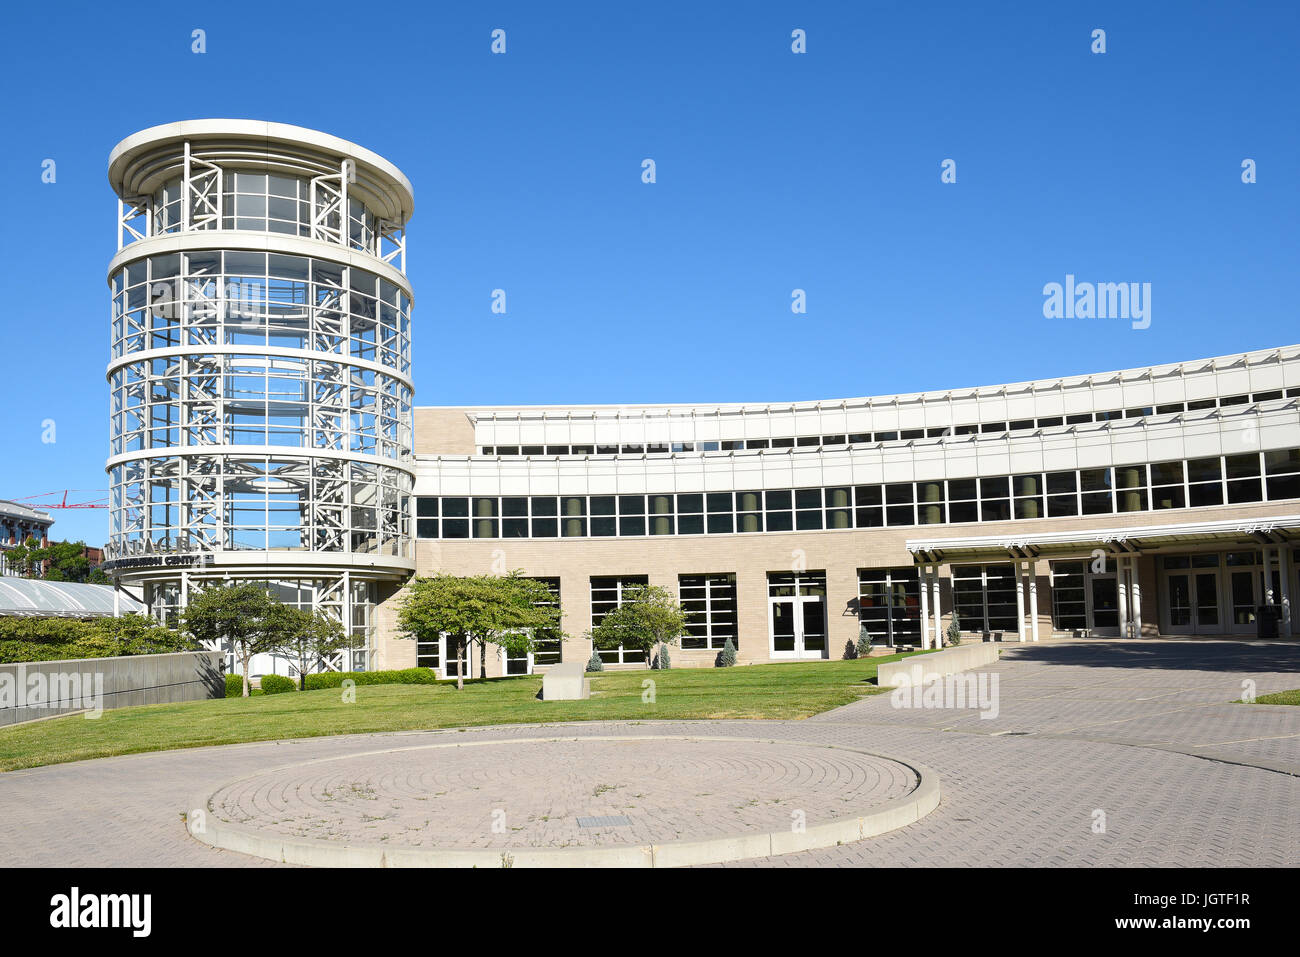 SALT LAKE CITY, UTAH - JUNE 29, 2017: The Calvin L. Rampton Salt Palace Convention Center. Named after Utahs 11th governor, it is commonly called the  Stock Photo